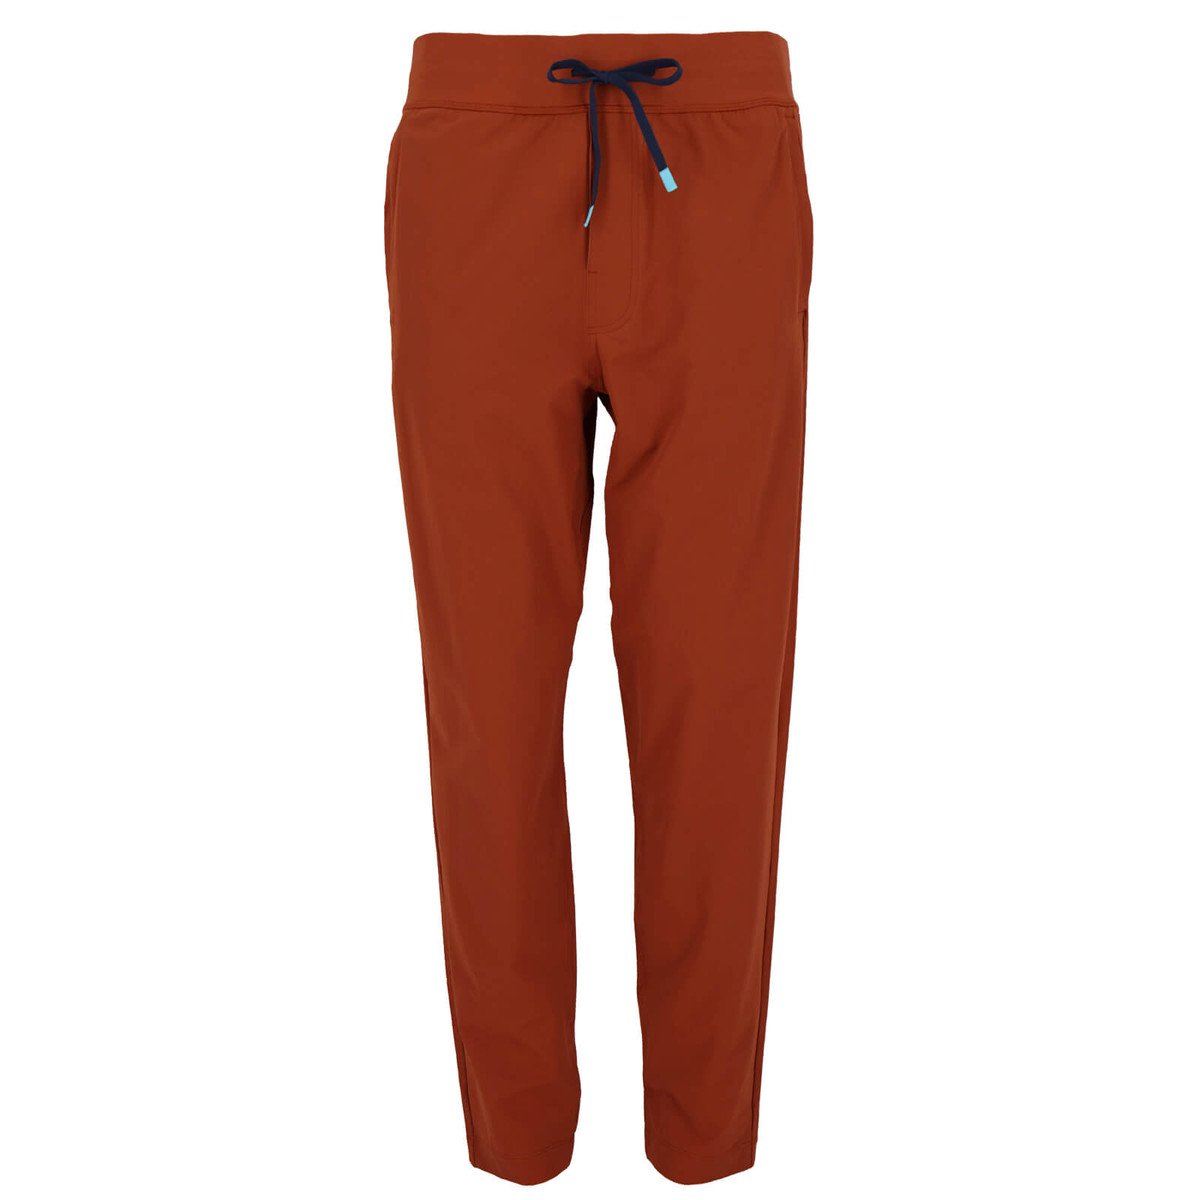 The Cotopaxi Veza Adventure Pants in a brick red color